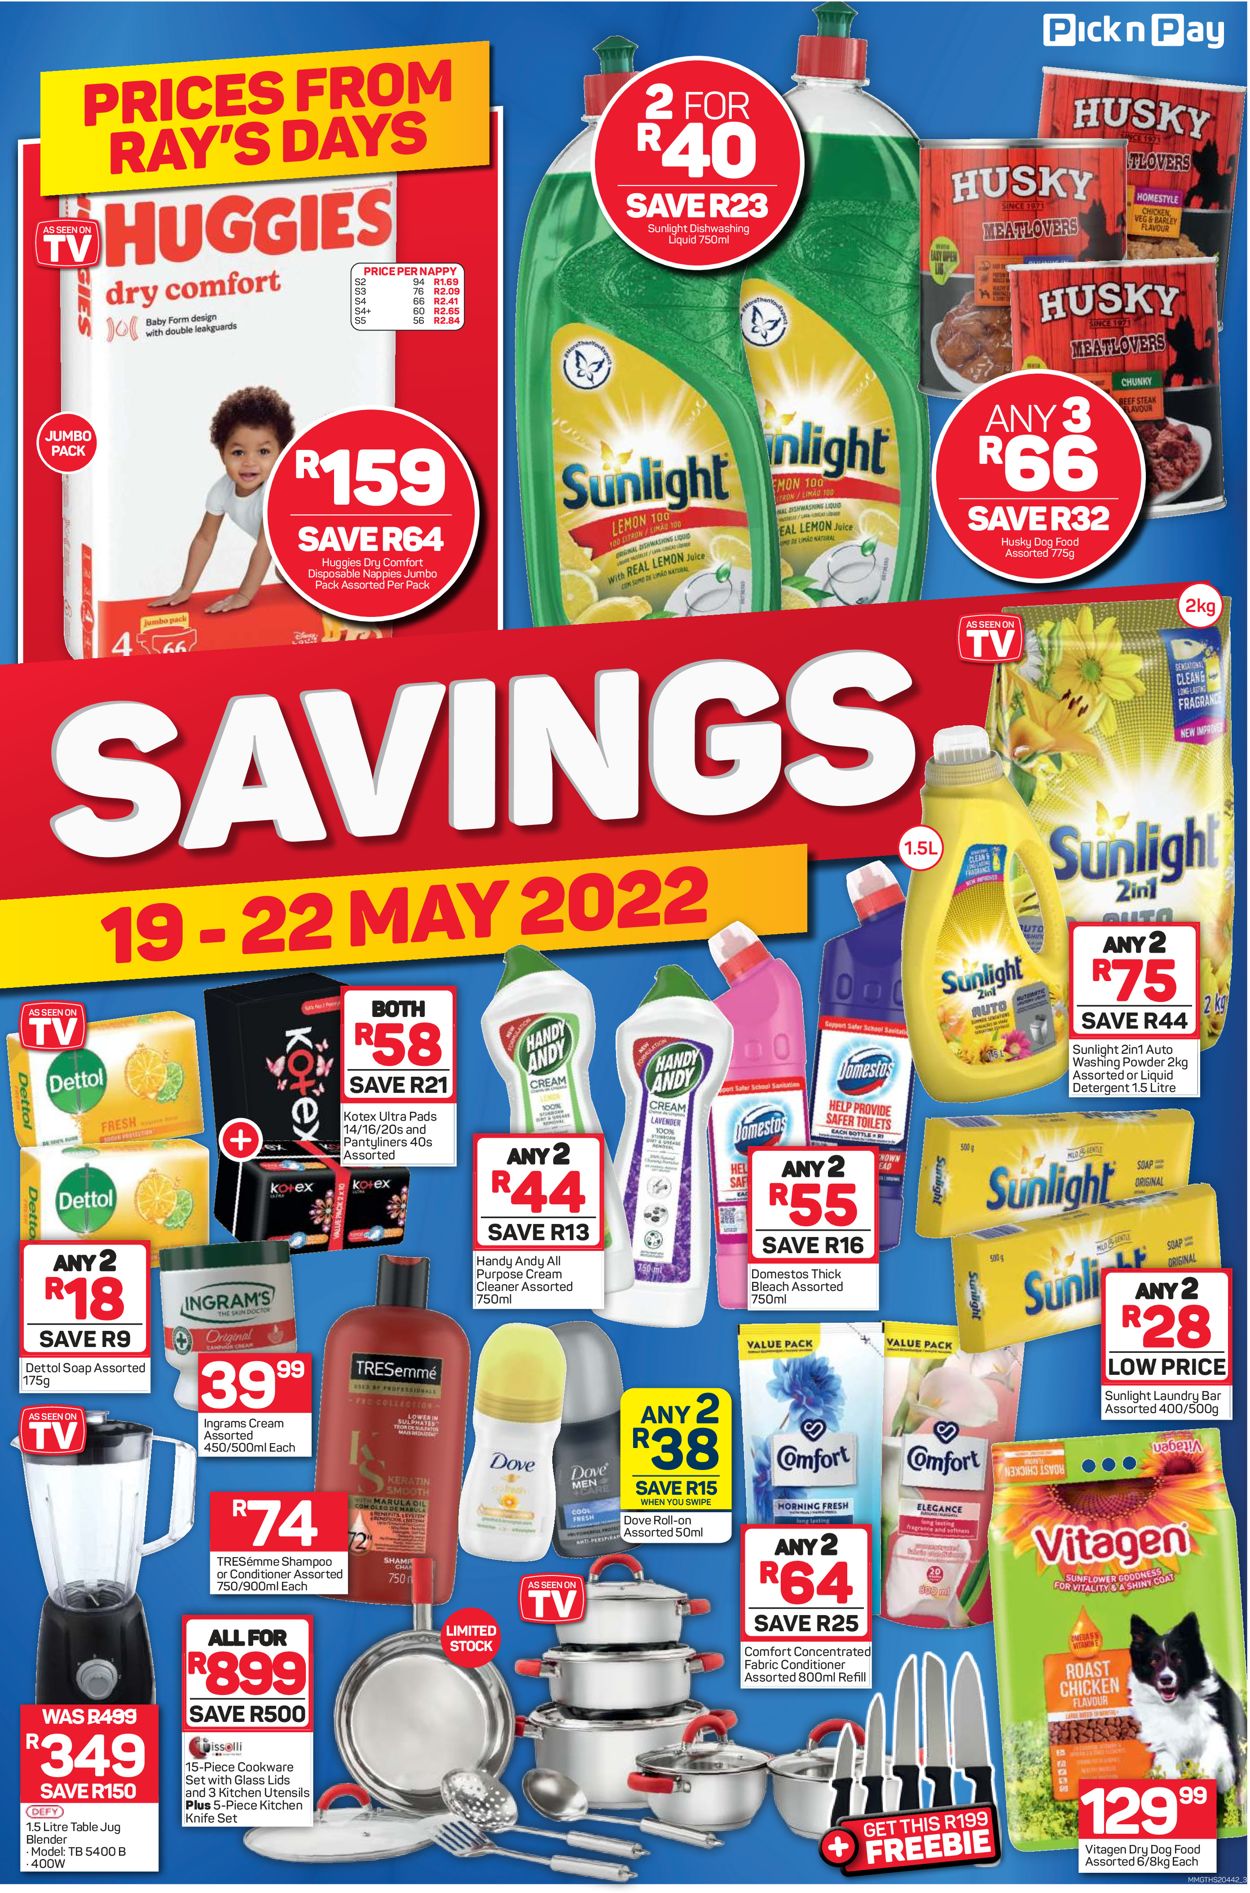 Pick n Pay Catalogue - 2022/05/19-2022/05/22 (Page 3)